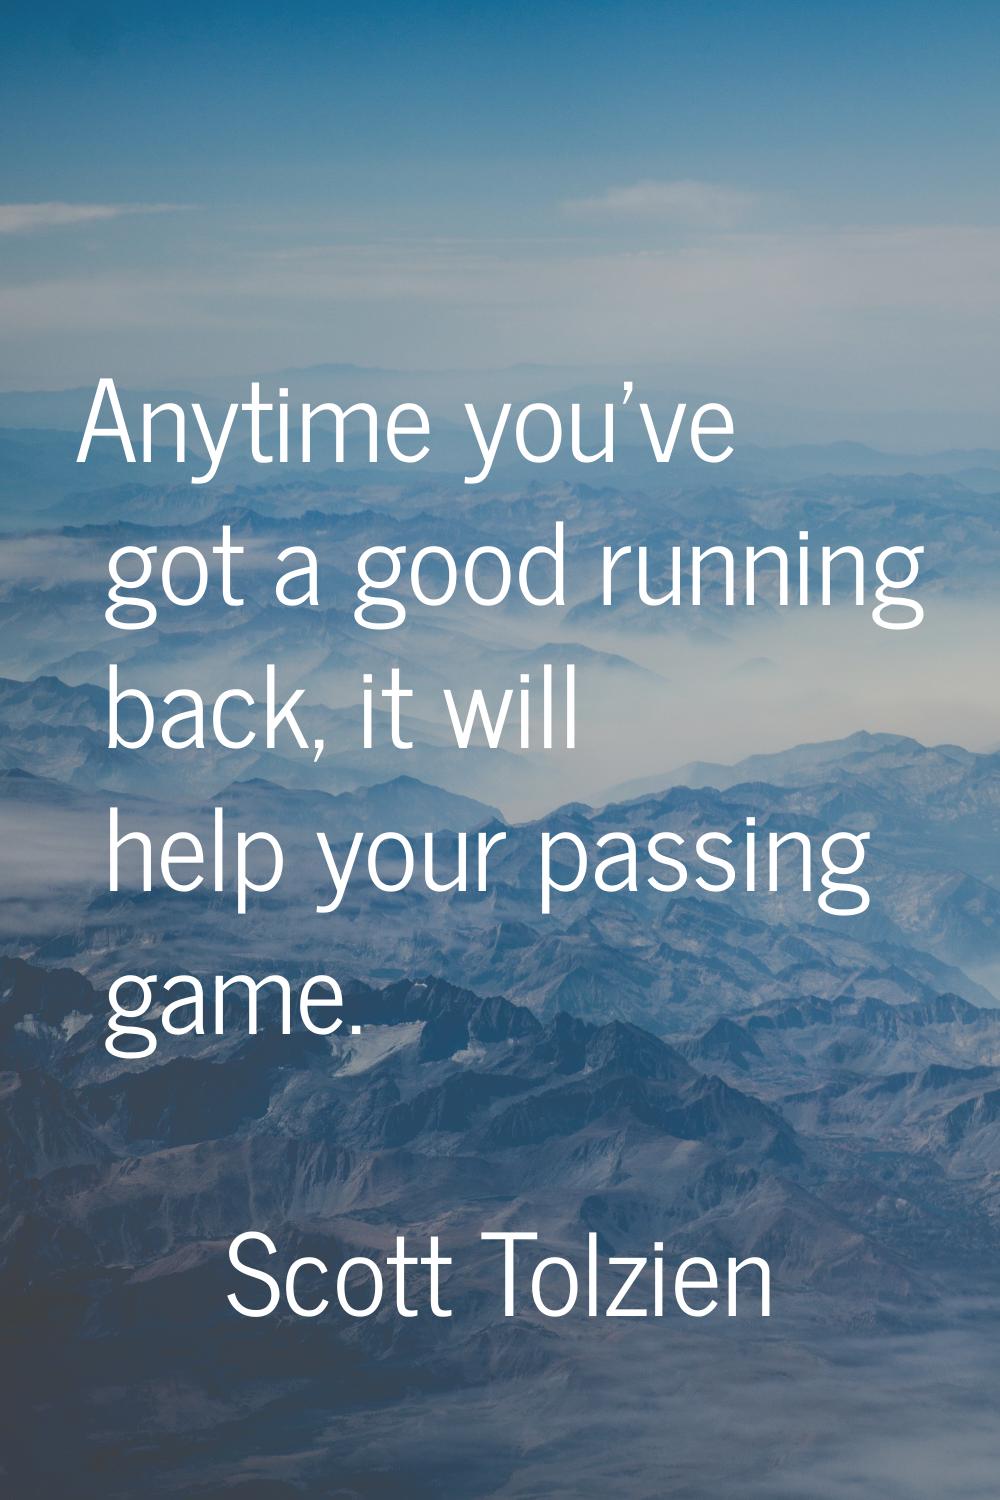 Anytime you've got a good running back, it will help your passing game.